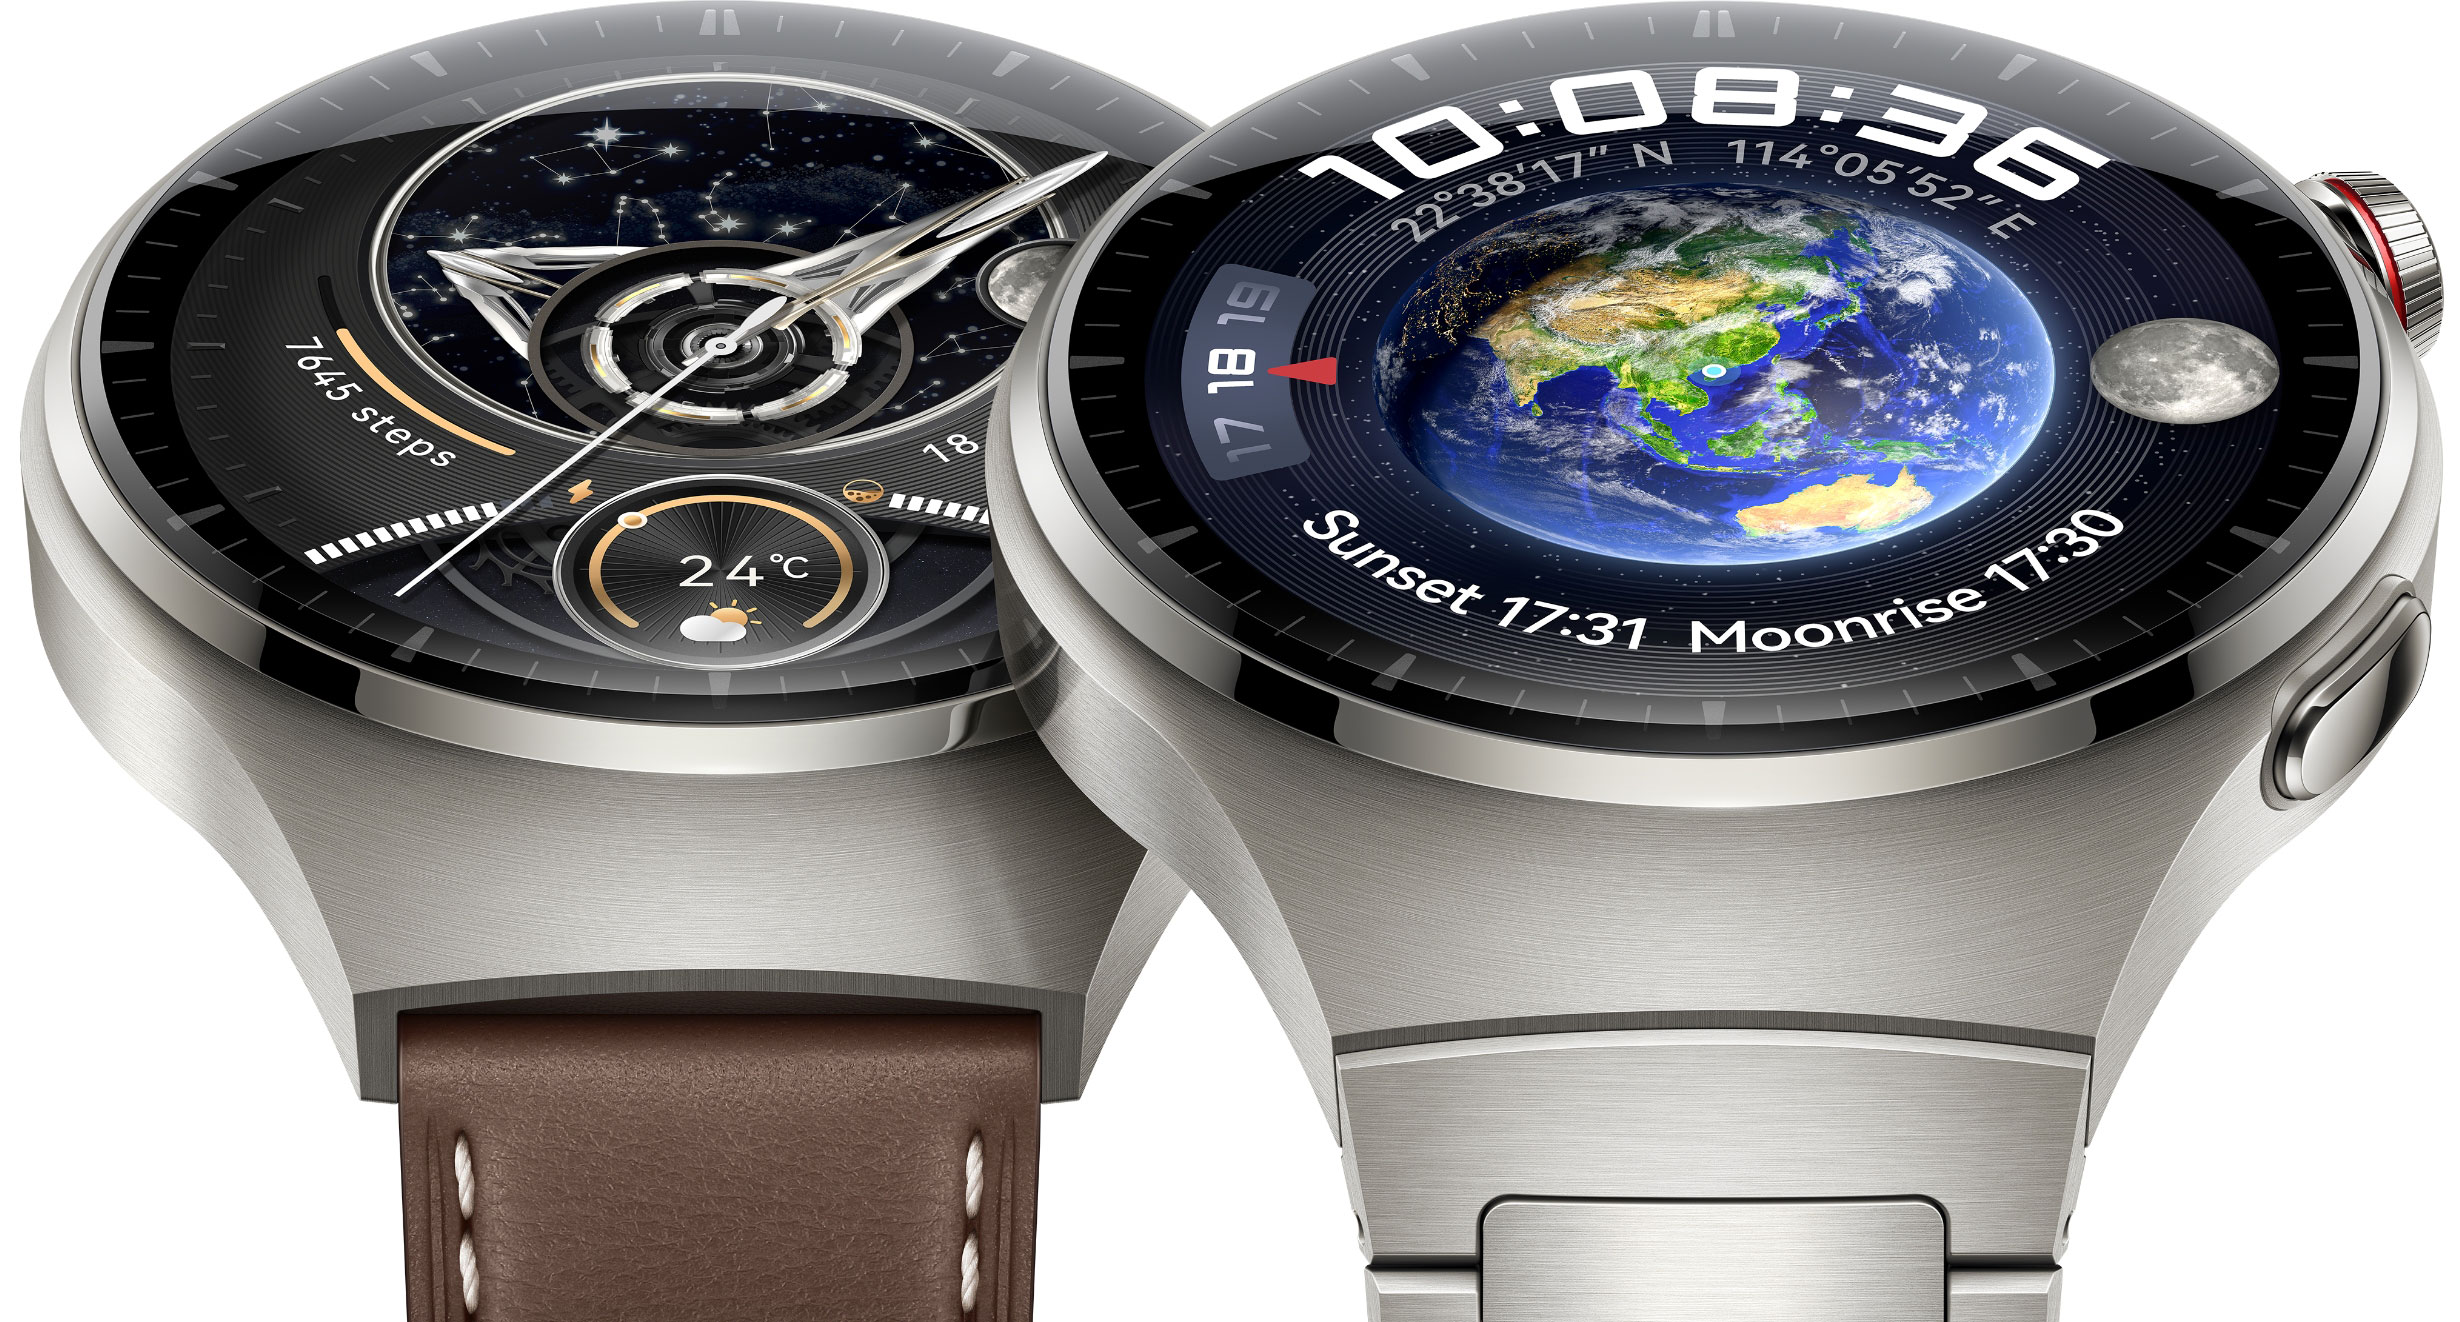 Huawei Watch 4 Pro has started receiving HarmonyOS 4 in the global marketplace